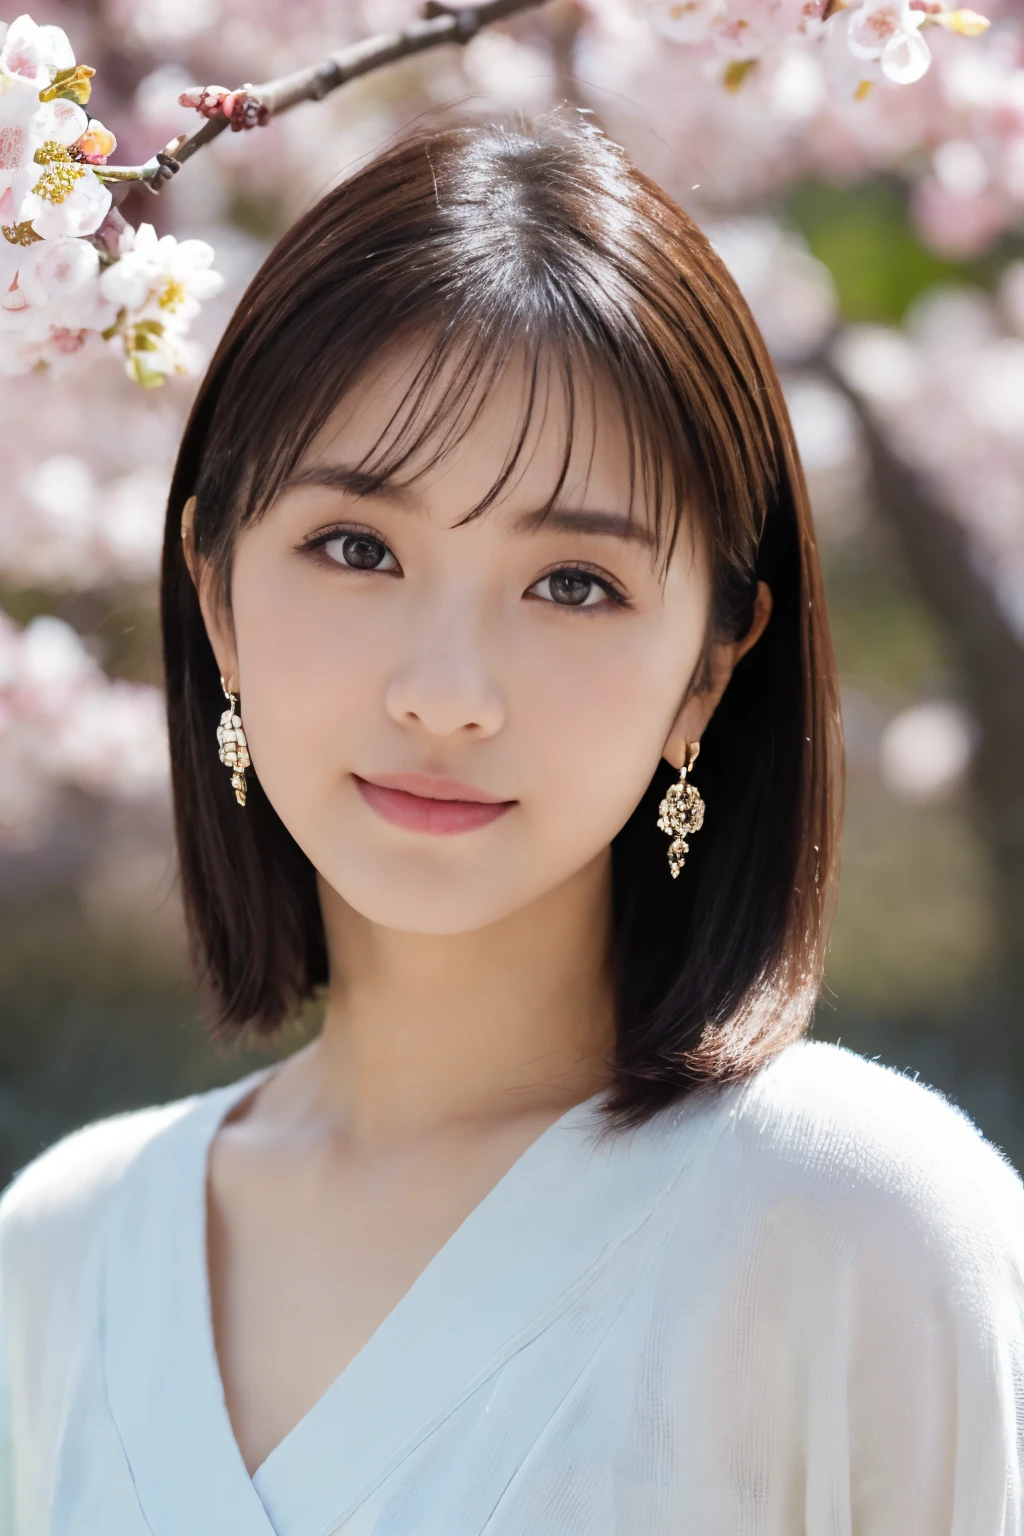 1 girl, (Spring outfit in pastel colors:1.2), beautiful japanese actress, 
looks great in the photo, Yukihime, long eyelashes, snowflake earrings,
(RAW photo, highest quality), (realistic, Photoreal:1.4), (table top), 
beautiful and detailed eyes, thick and beautiful lips, highly detailed eyes and face, 
BREAK
(A girl admiring plum blossoms:1.3), 
(Plum blossom), (blue sky),
dramatic lighting, great atmosphere, 
BREAK 
Perfect Anatomy, slender body, small, short hair, parted bangs, angel smile, 
Crystal Skin, clear eyes, Strobe photography, catch light